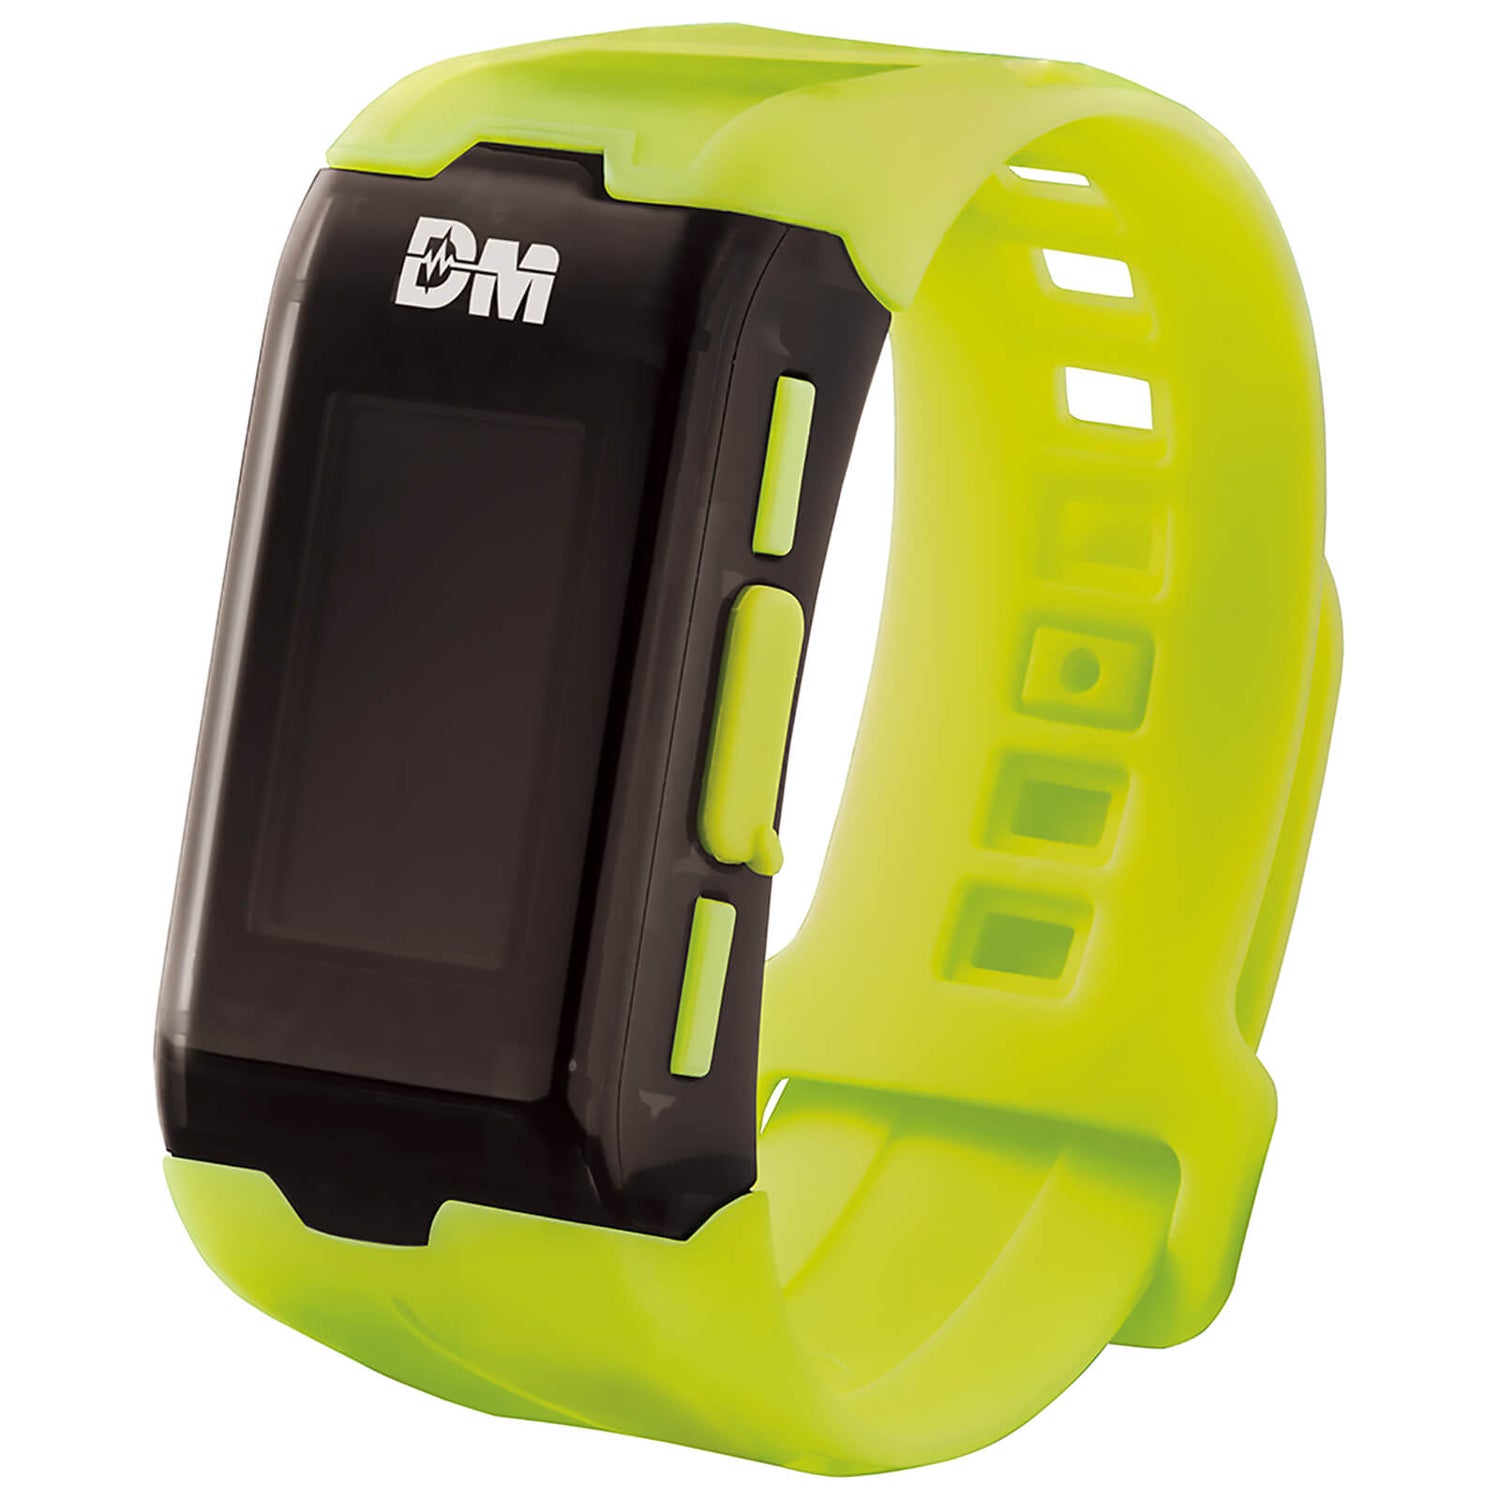 Bandai Digimon Vital Bracelet Fitness Tracker Watch Special Version in Yellow with Ancient Warriors DIM Card - Zavvi Exclusive